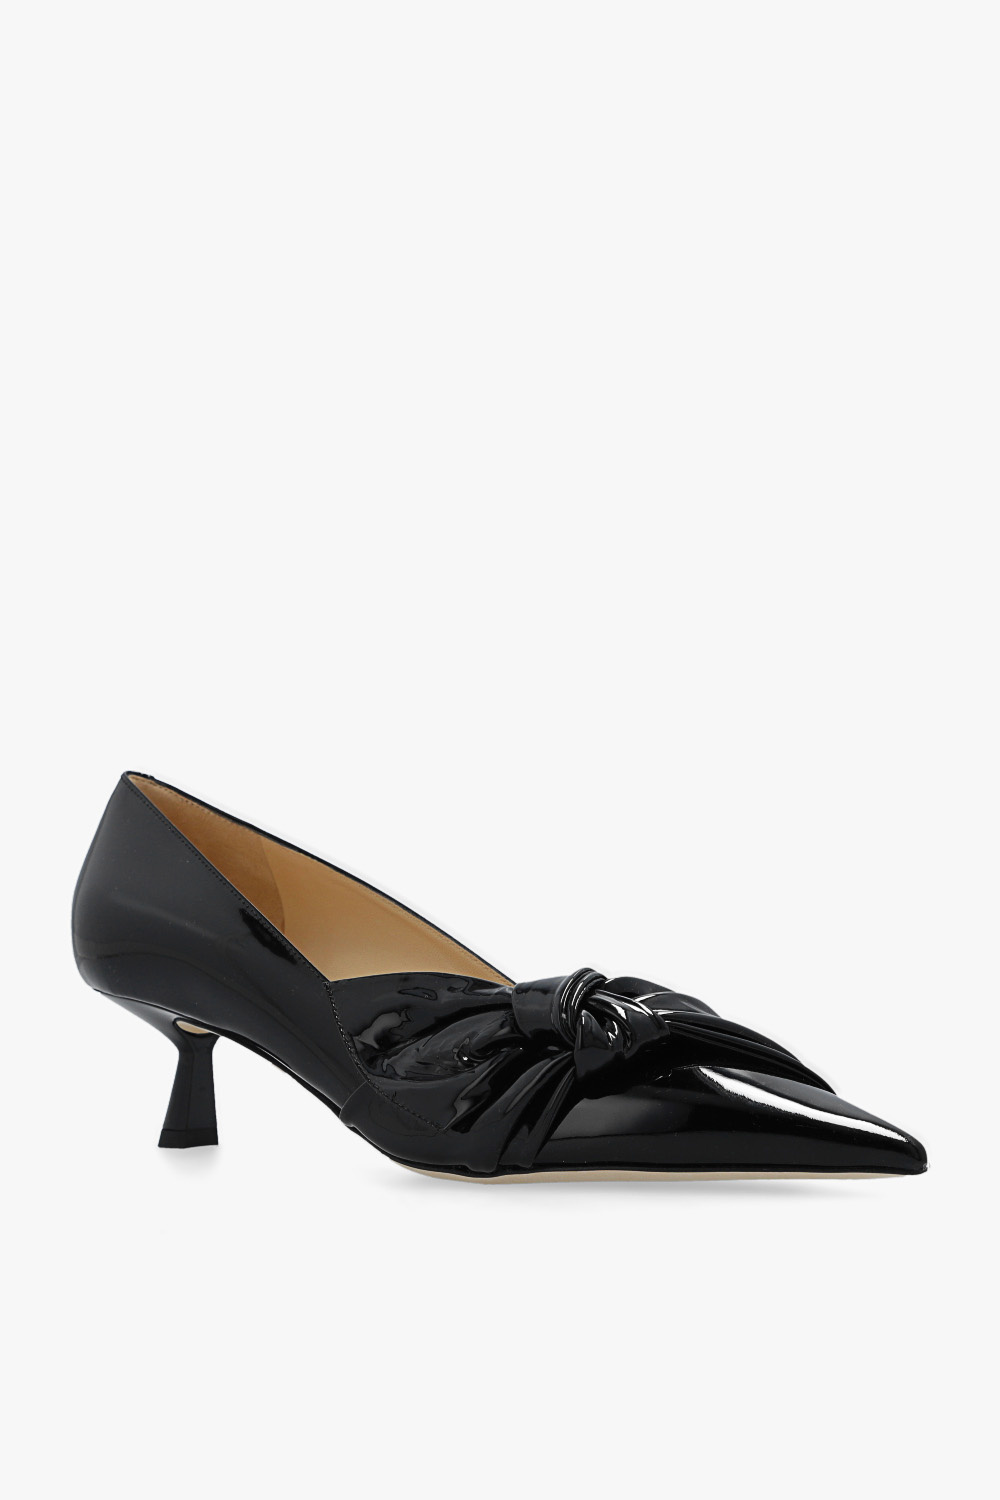 Jimmy Choo ‘Elinor’ pumps in patent leather